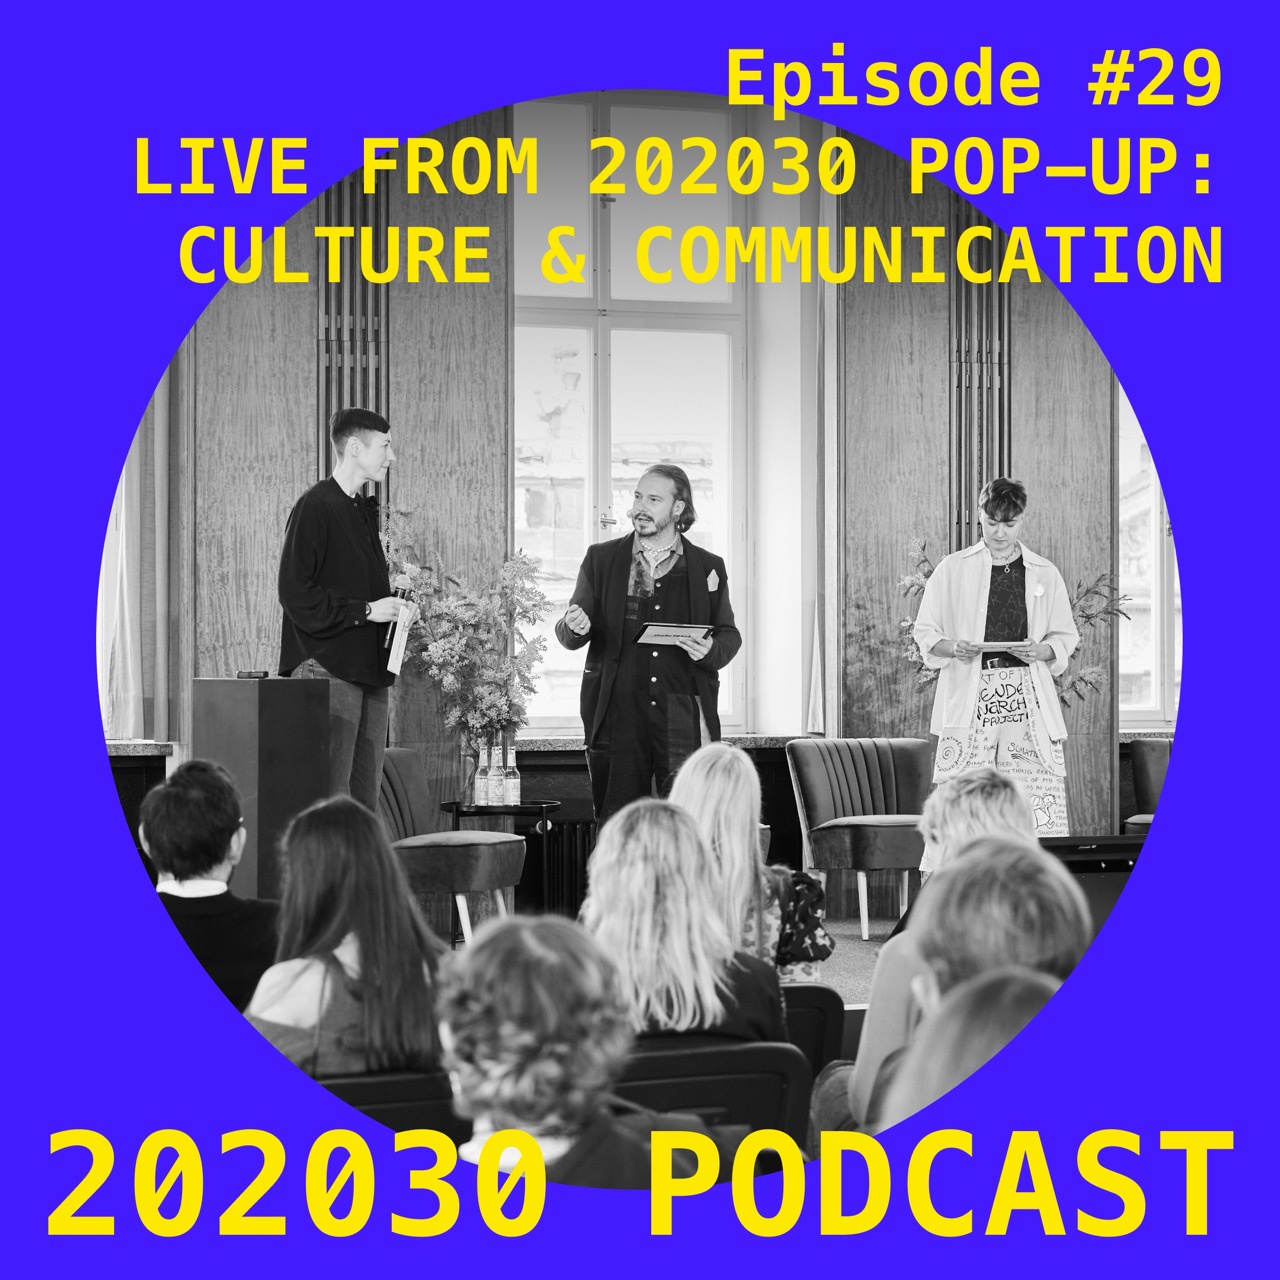 #29 – Live from 202030 Pop-up: Culture & Communication